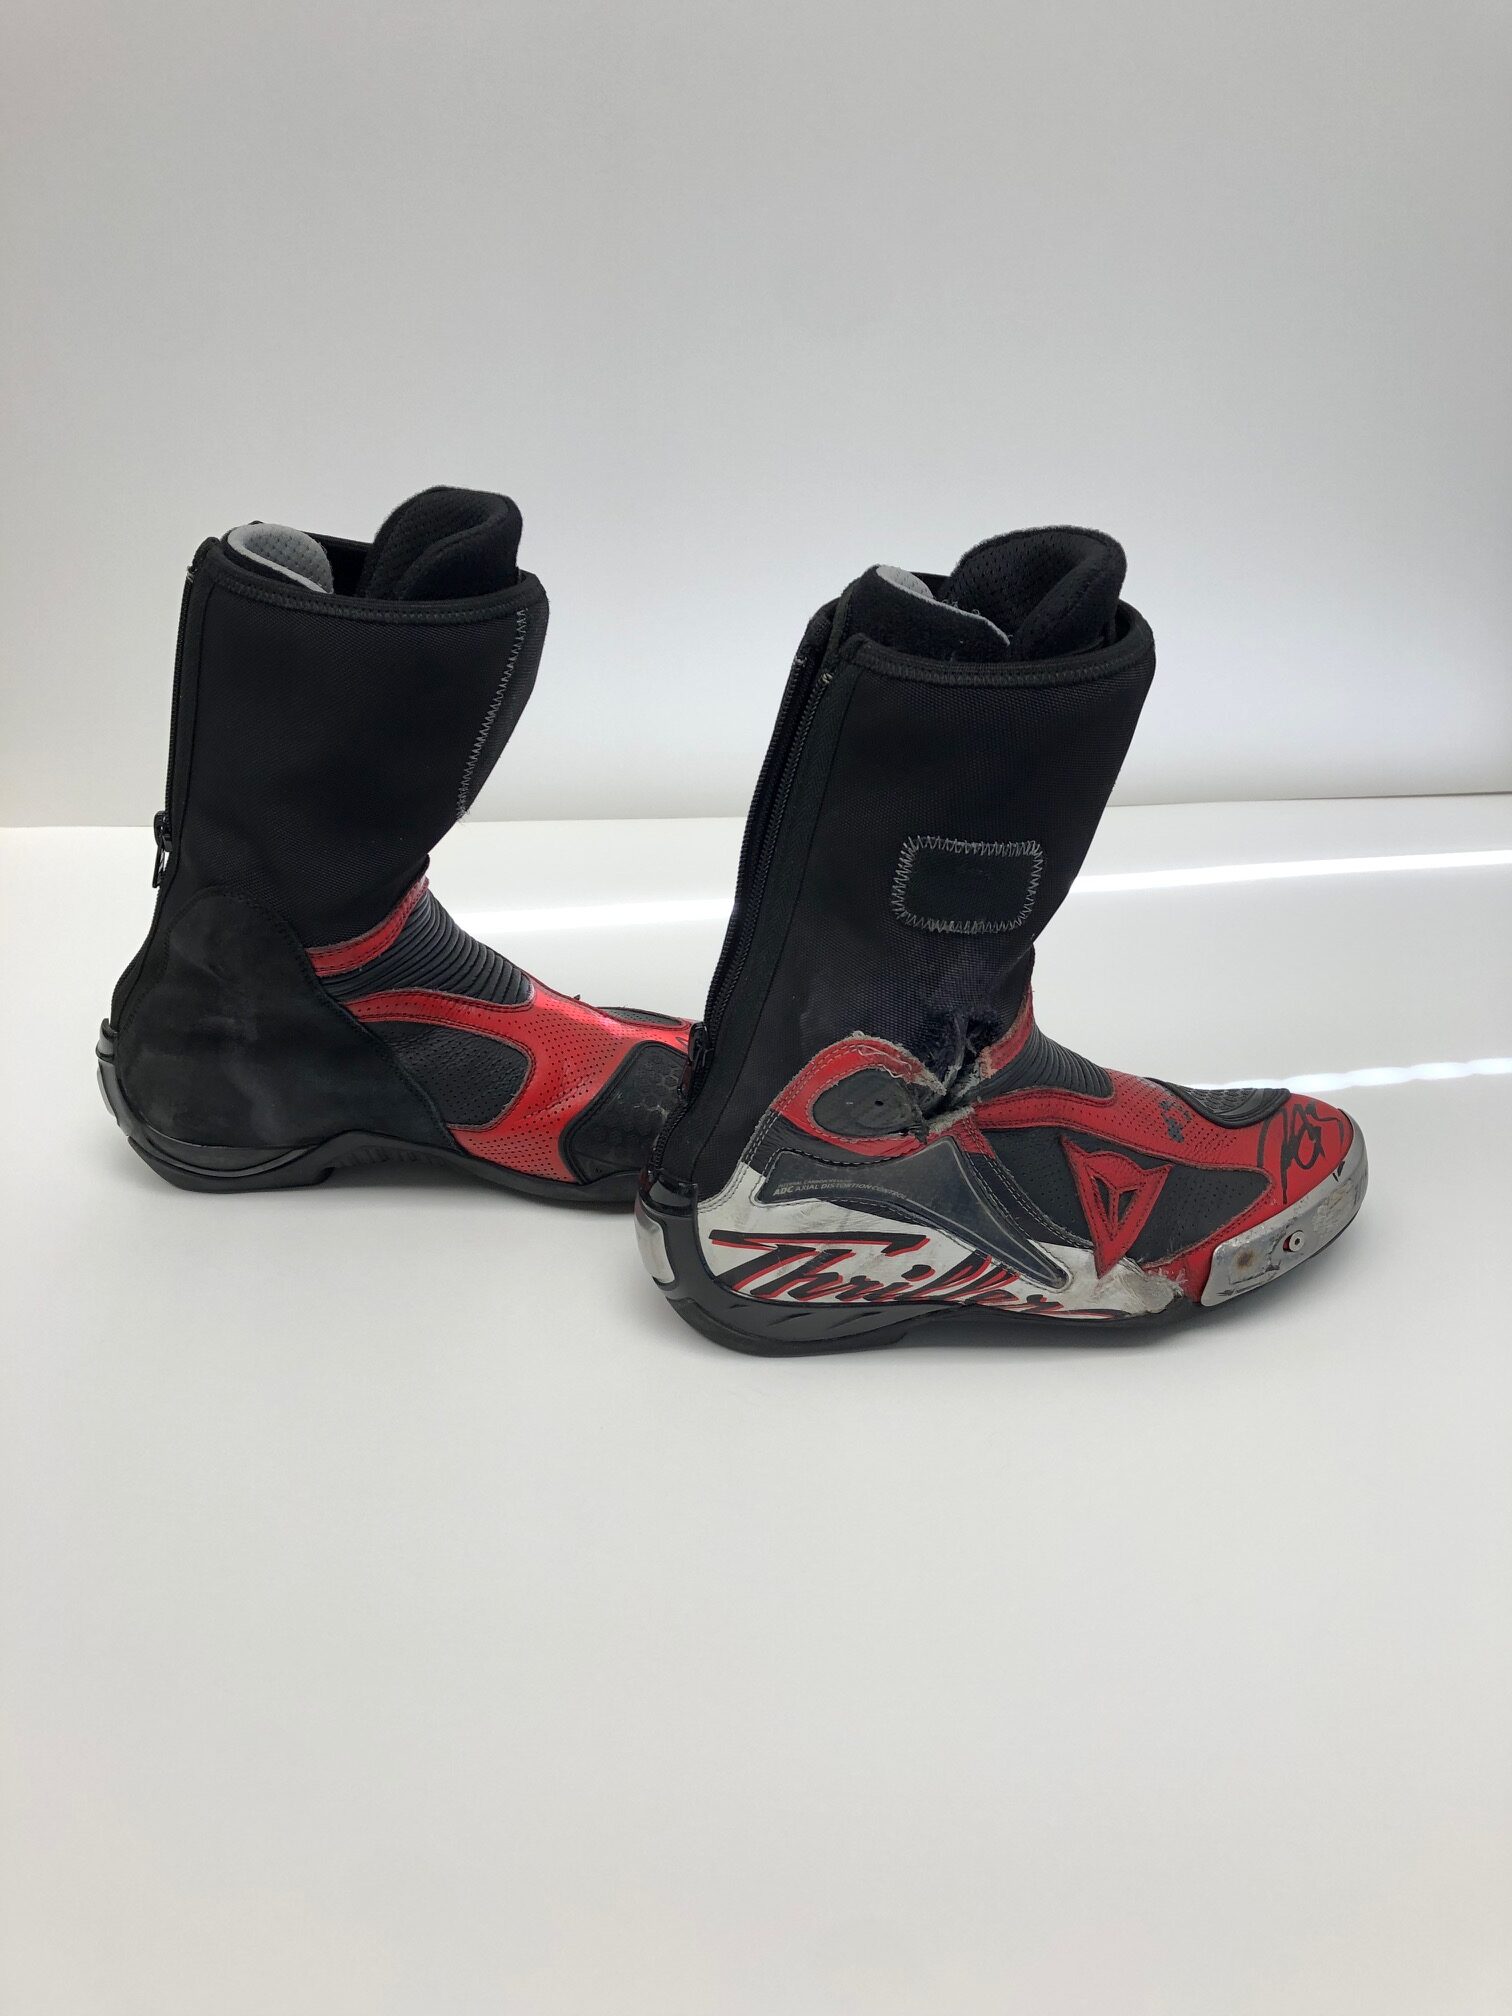 Jack Miller 2022 Worn Dainese Boots - Autographed Collectables